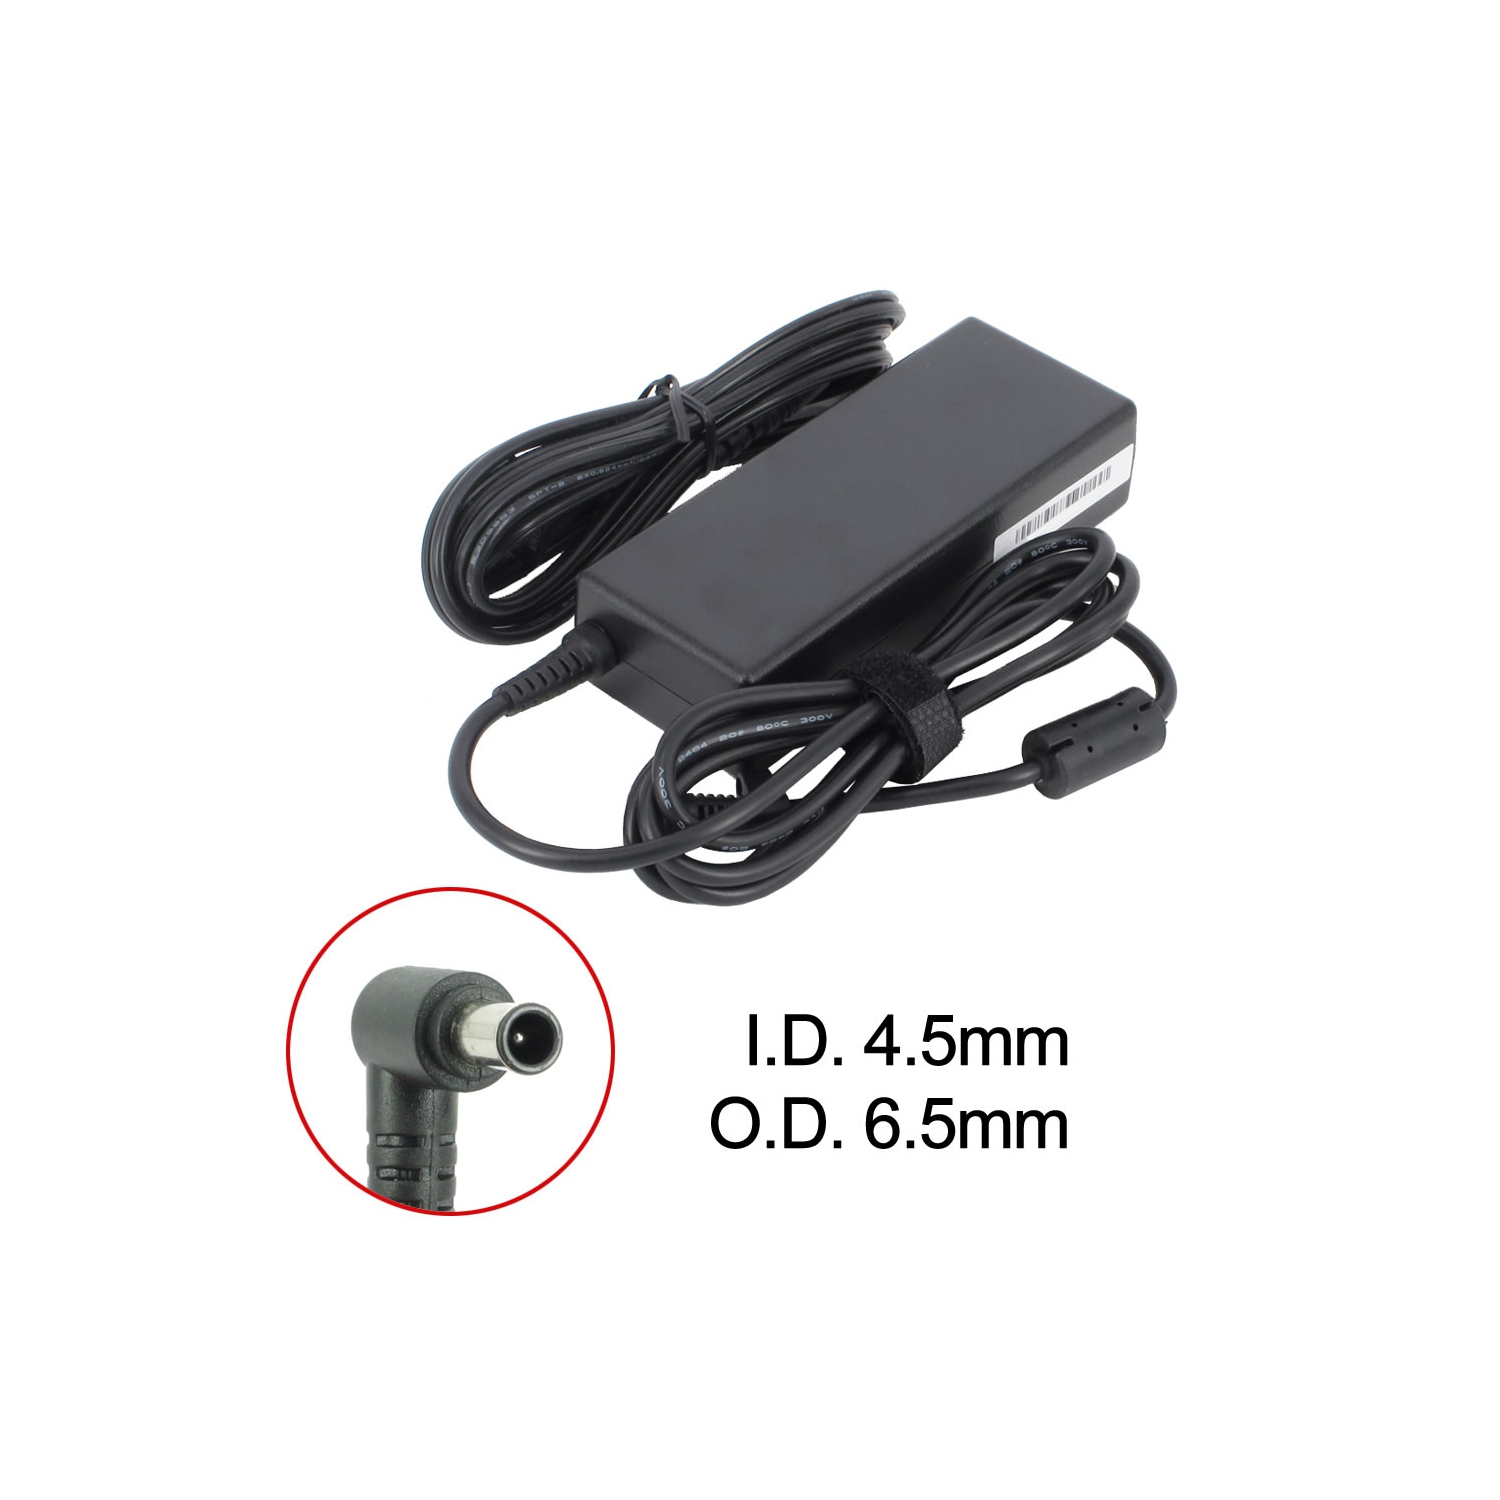 Brand New Laptop AC Adapter for Sony VAIO PCG-GRS55, PCGA-AC19V1, PCGA-AC19V23, VGP-AC19V19, VGP-AC19V27, VGP-AC19V48